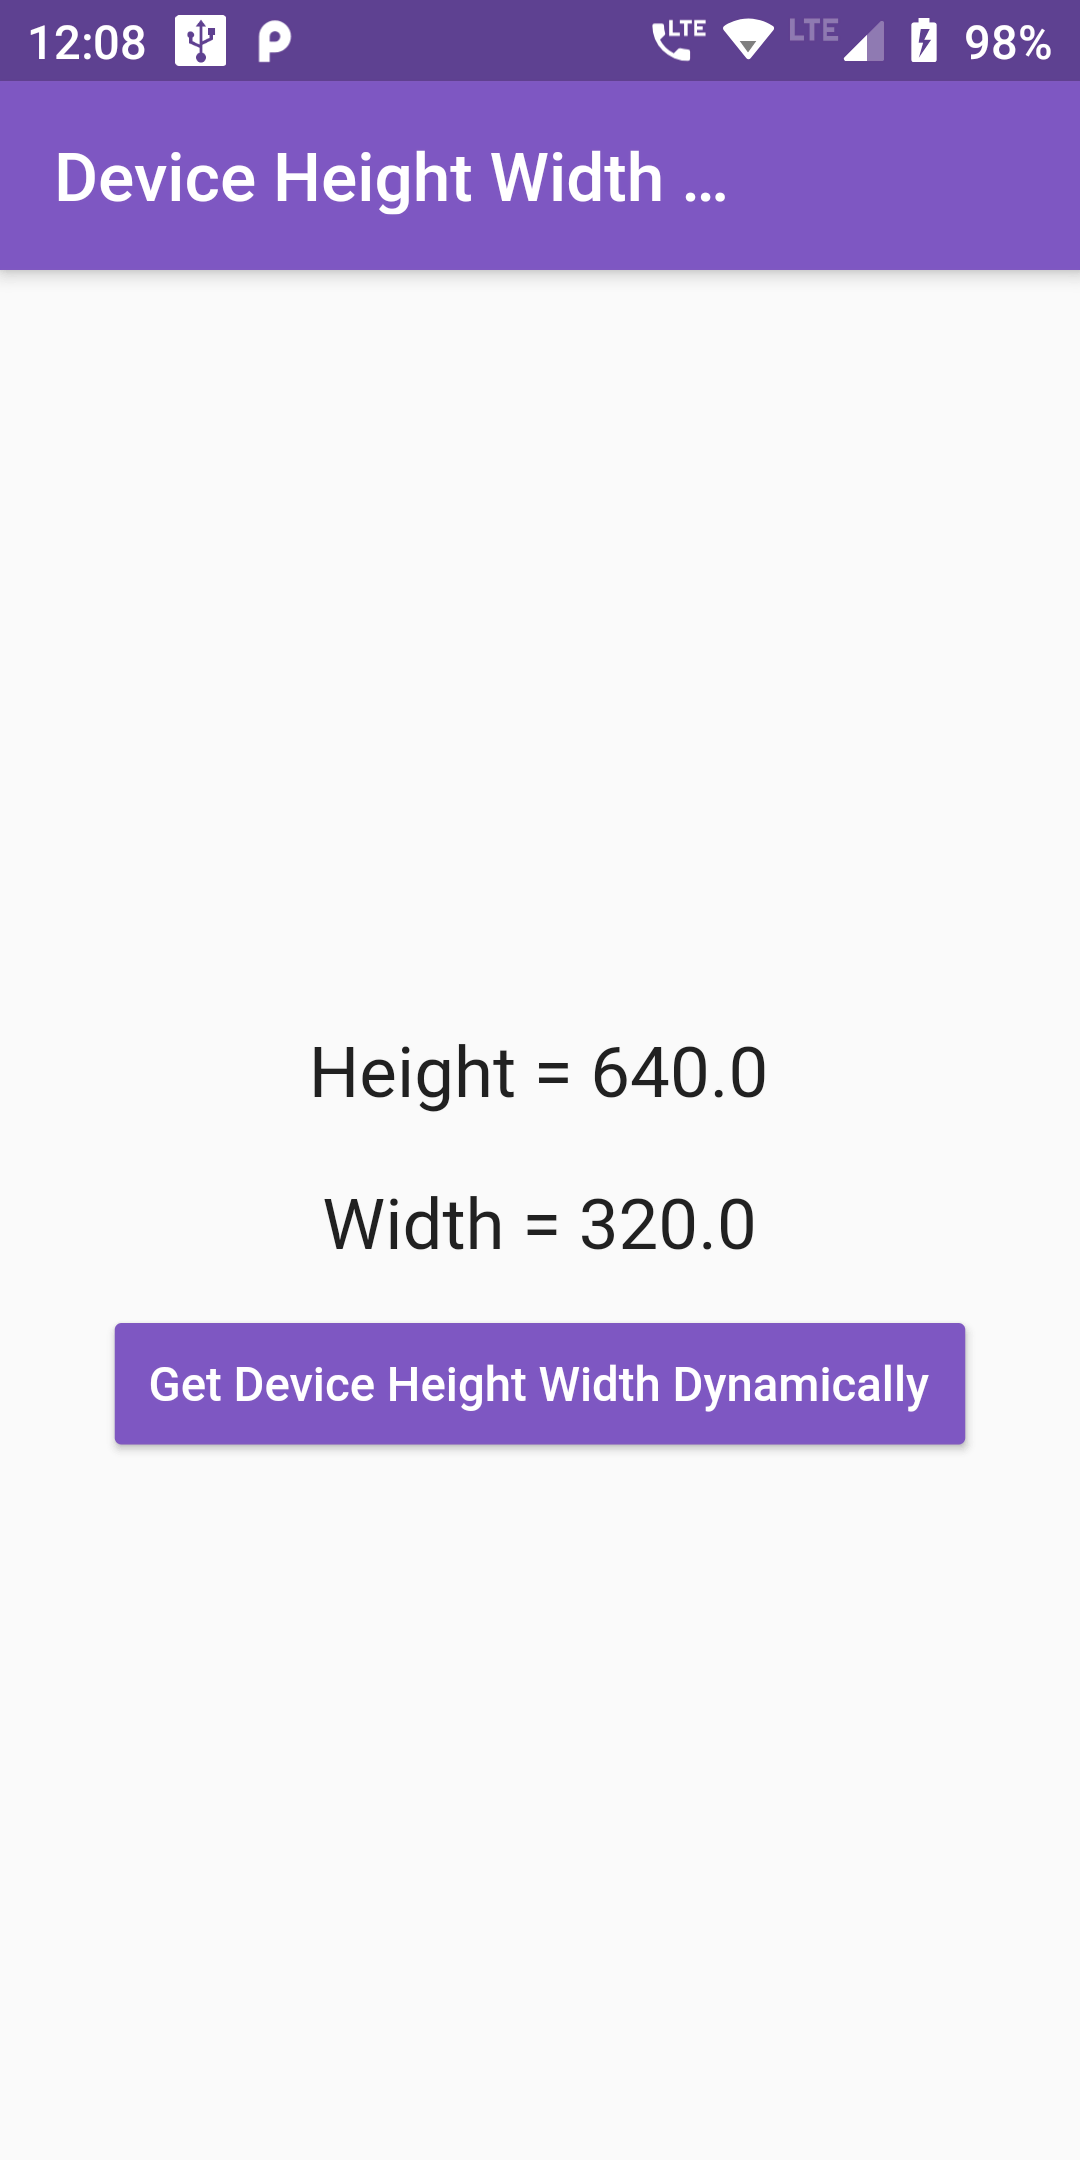 How To Add Device Screen Height&Width In Flutter App